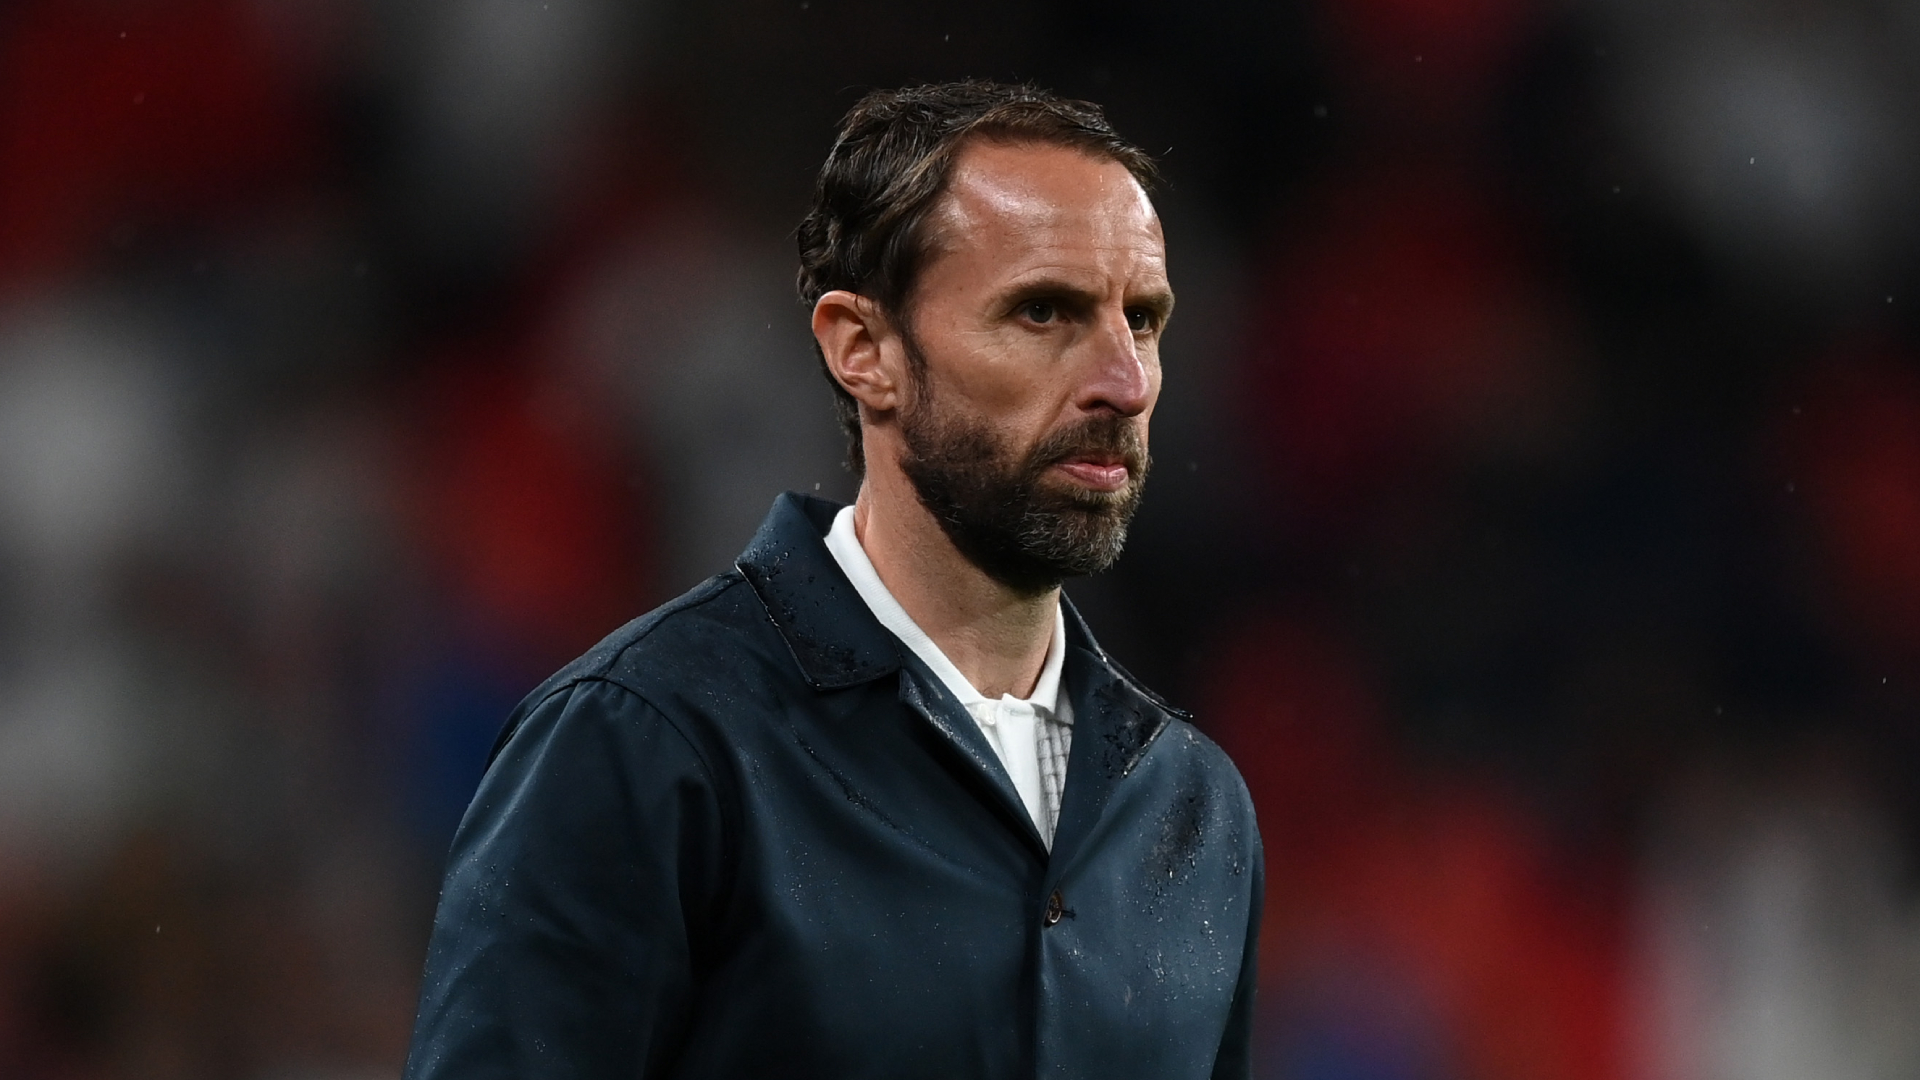 England to face Italy behind closed doors